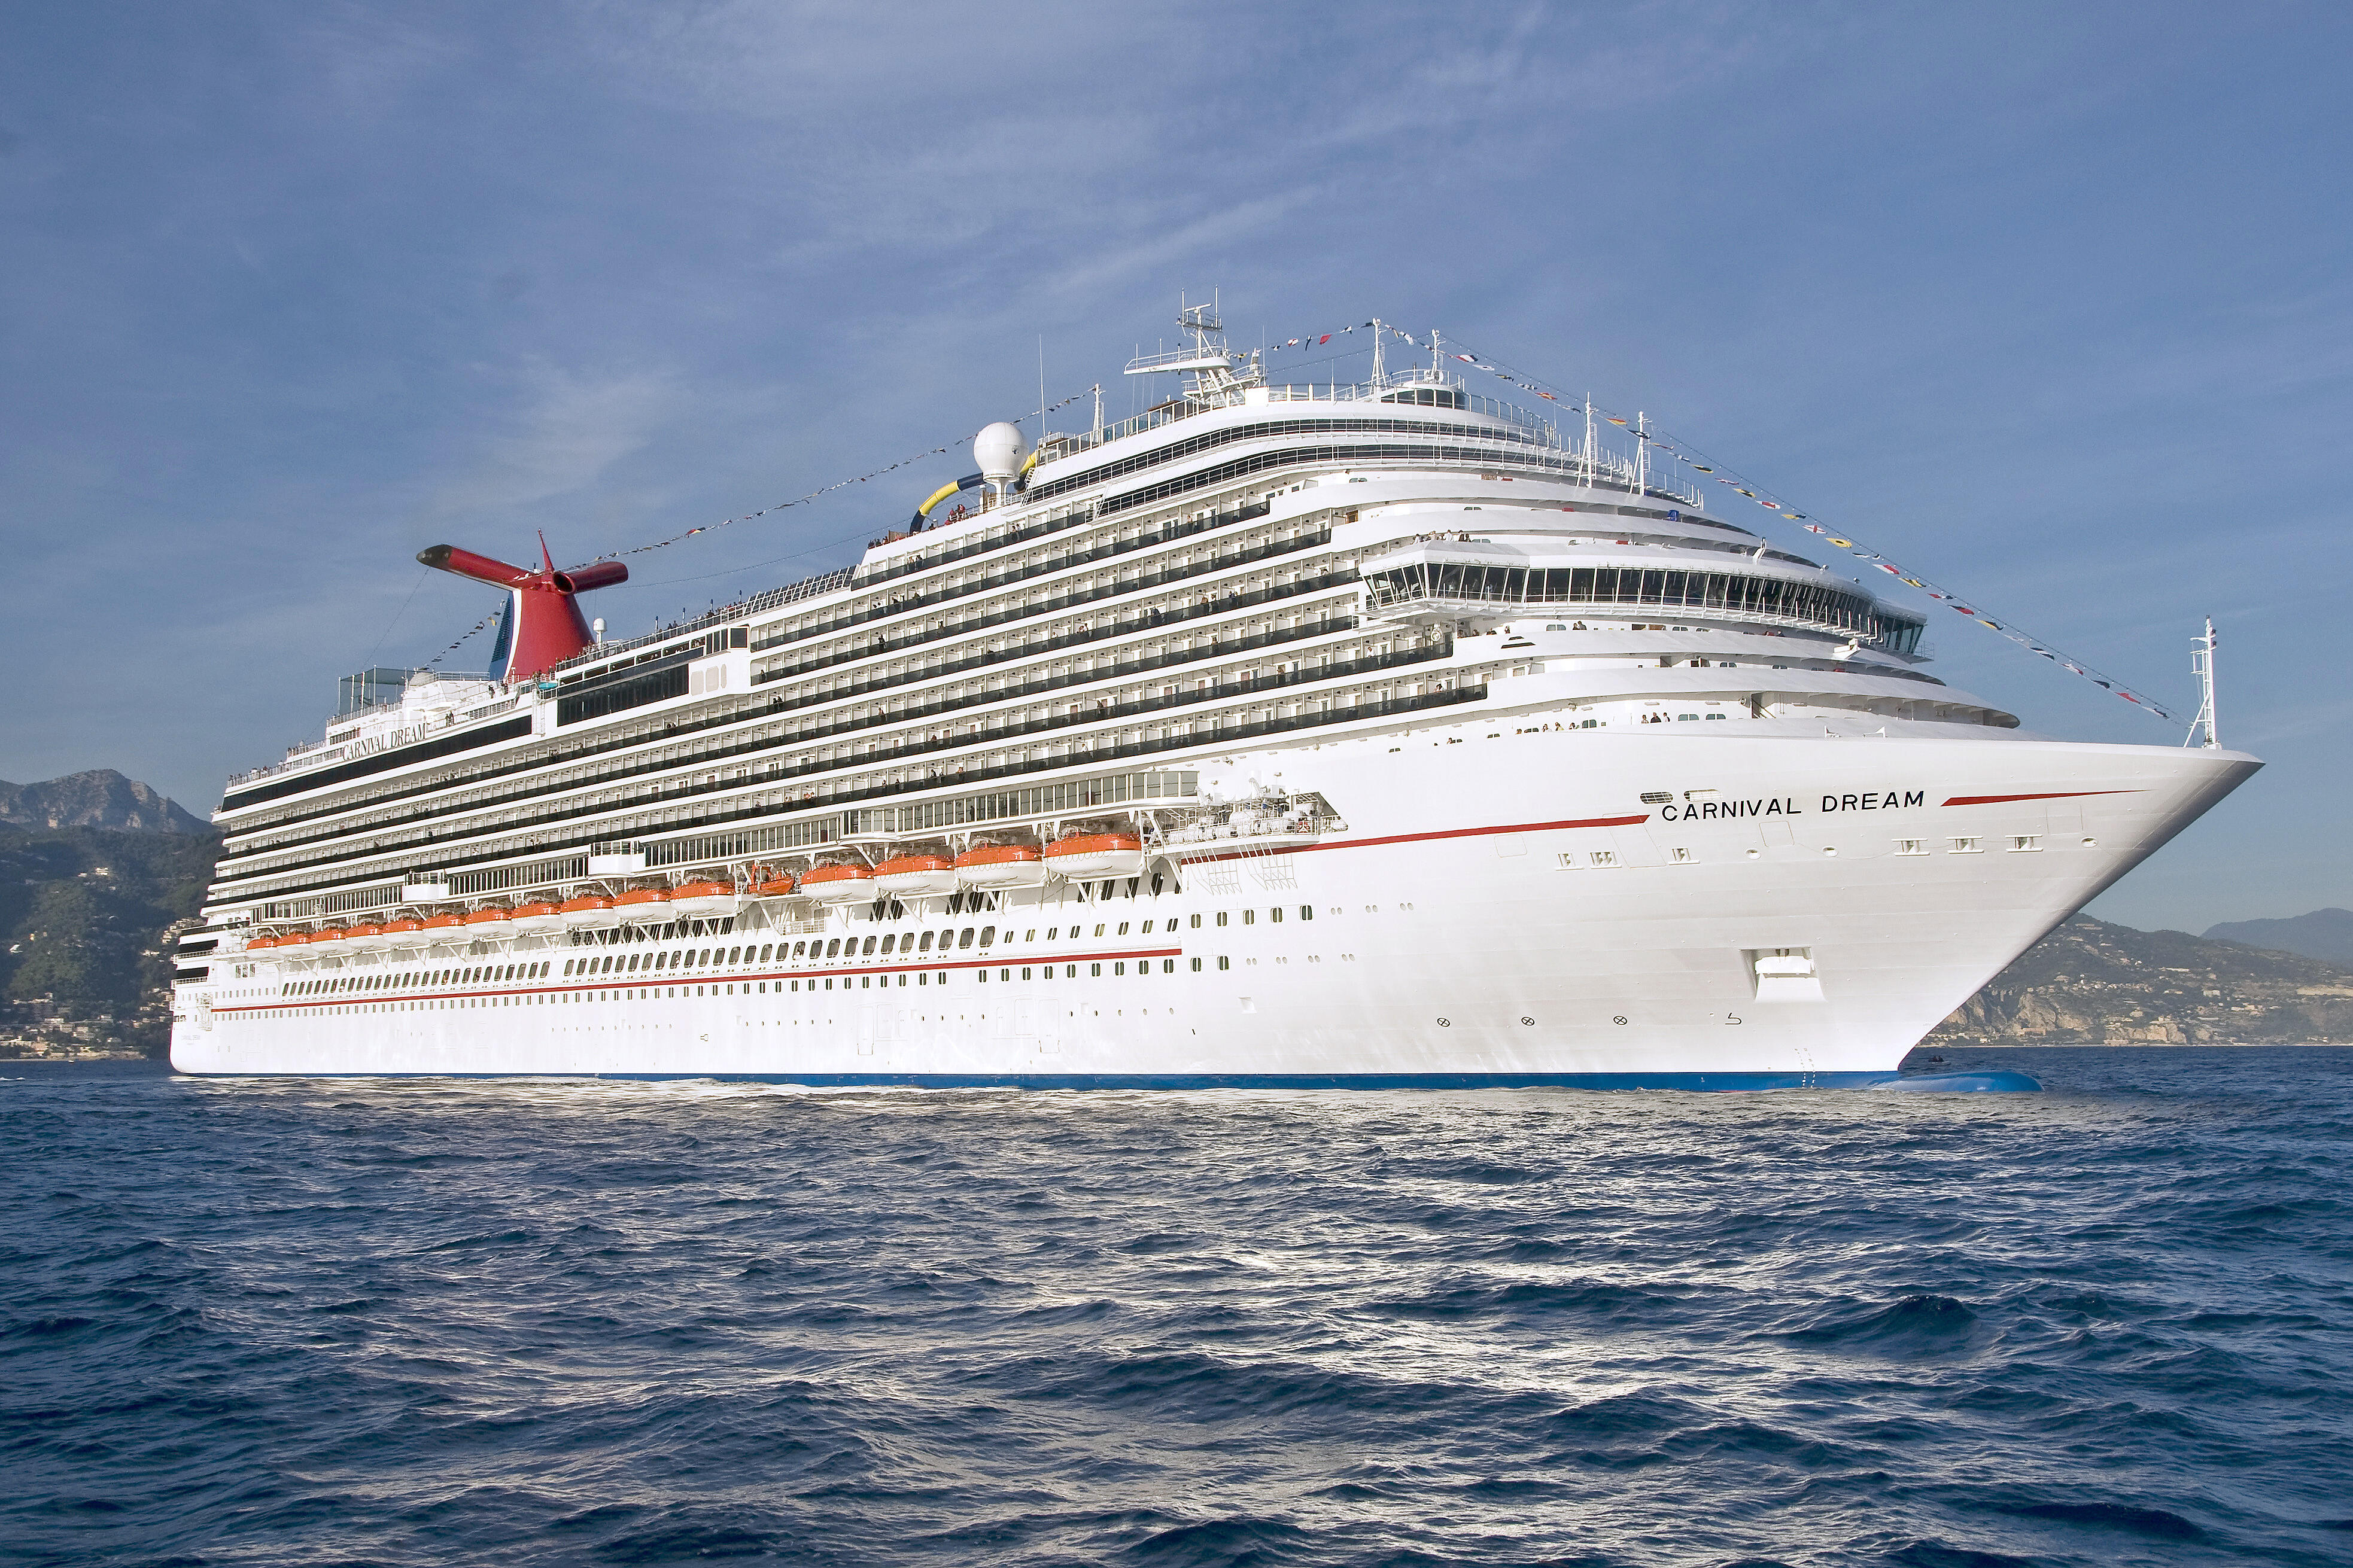 christy kincer recommends Carnival Dream Cruise Pictures